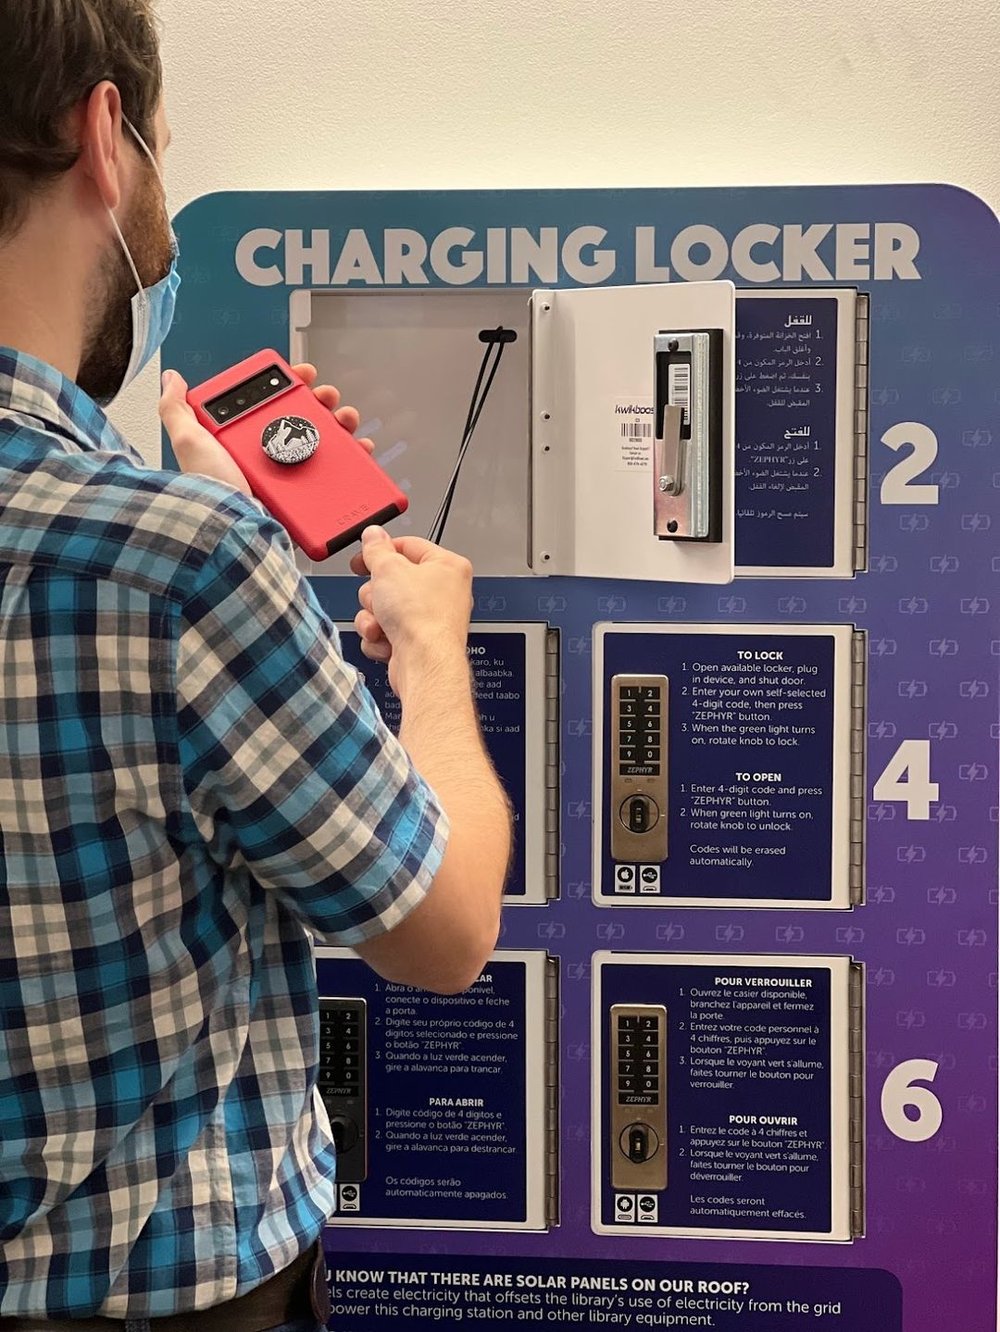 Juice up your phone in one of these handy charging lockers—note the variety of languages that explain how.